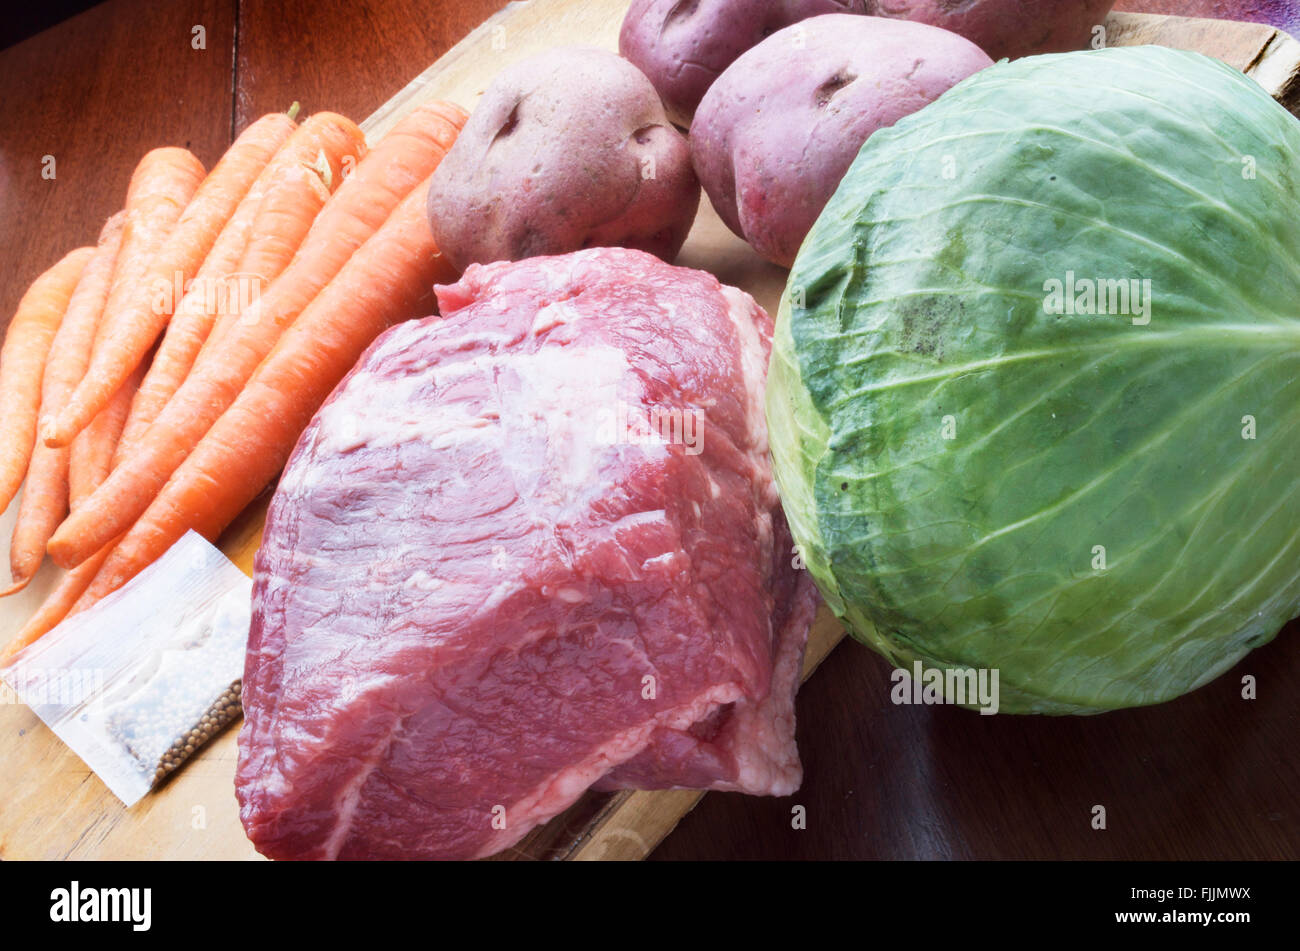 Corn Beef Cabbage, Carrots, Potatoes in the Raw State Stock Photo